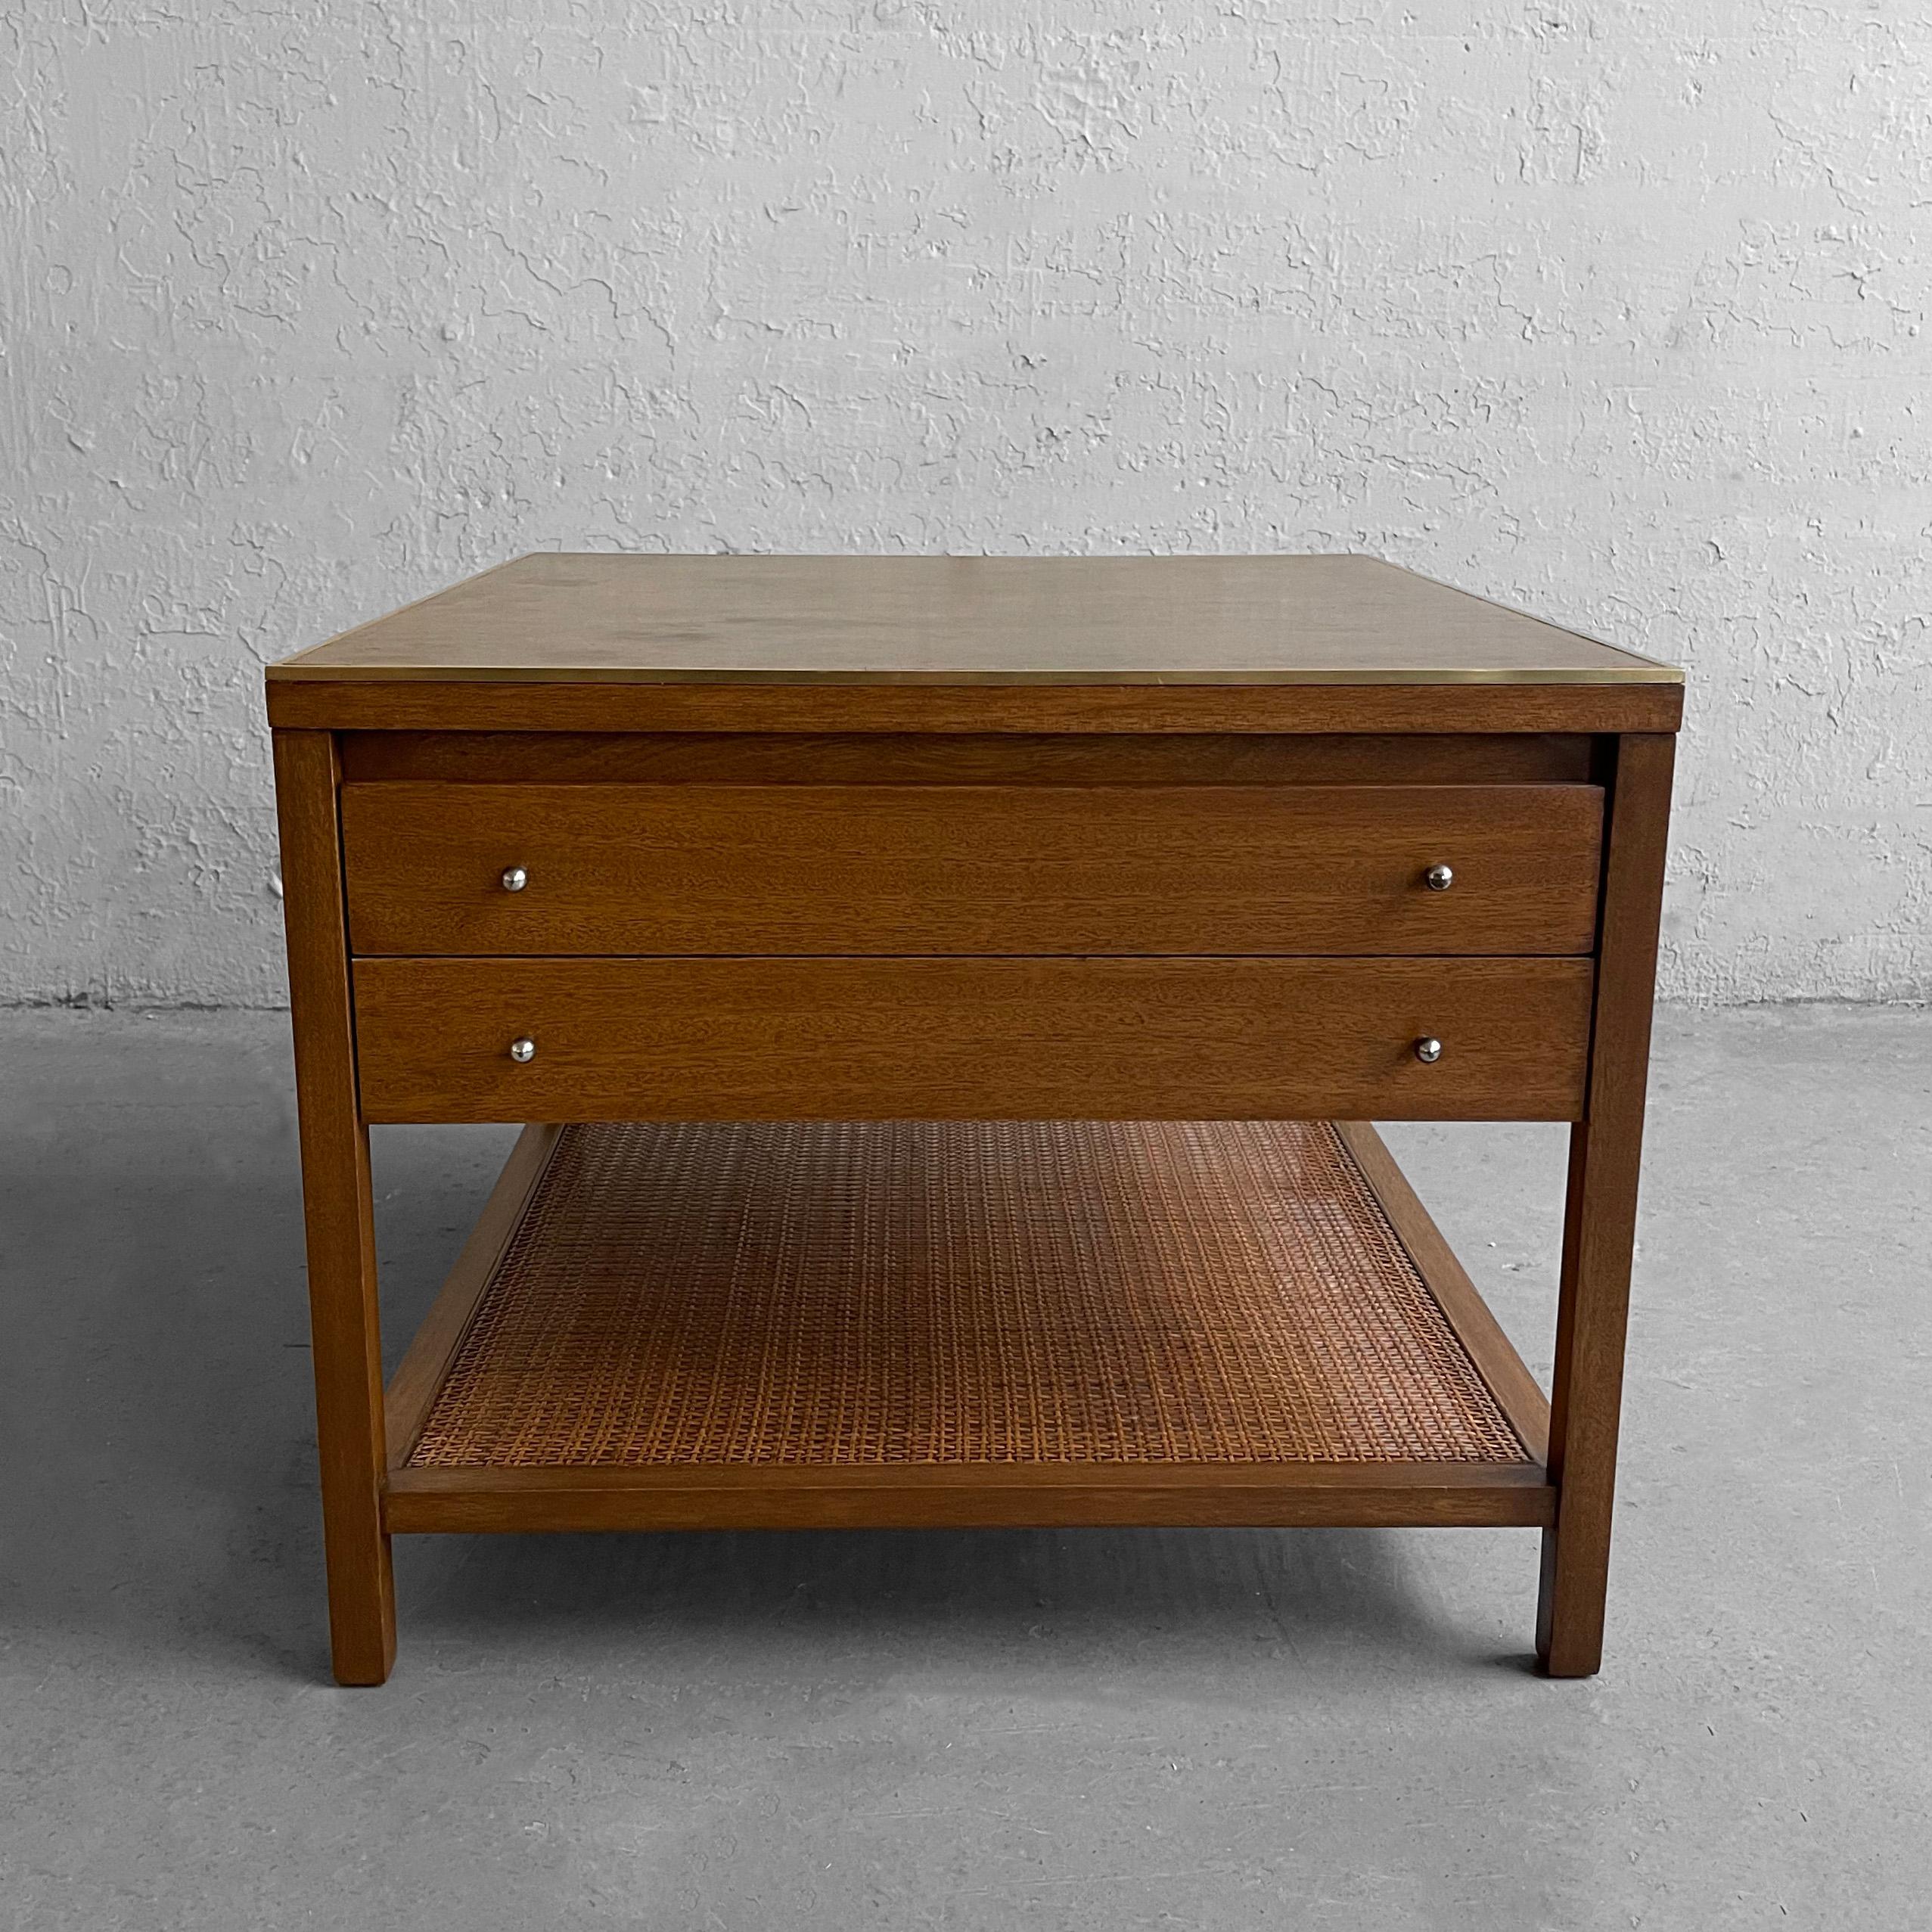 Mid-Century Modern, bleached mahogany, end table by Paul McCobb for Calvin, Irwin Collection features a leather top with brass trim, caned lower shelf and nickel plated brass pulls. The caned lower level measures 7 inches height. The two drawers are